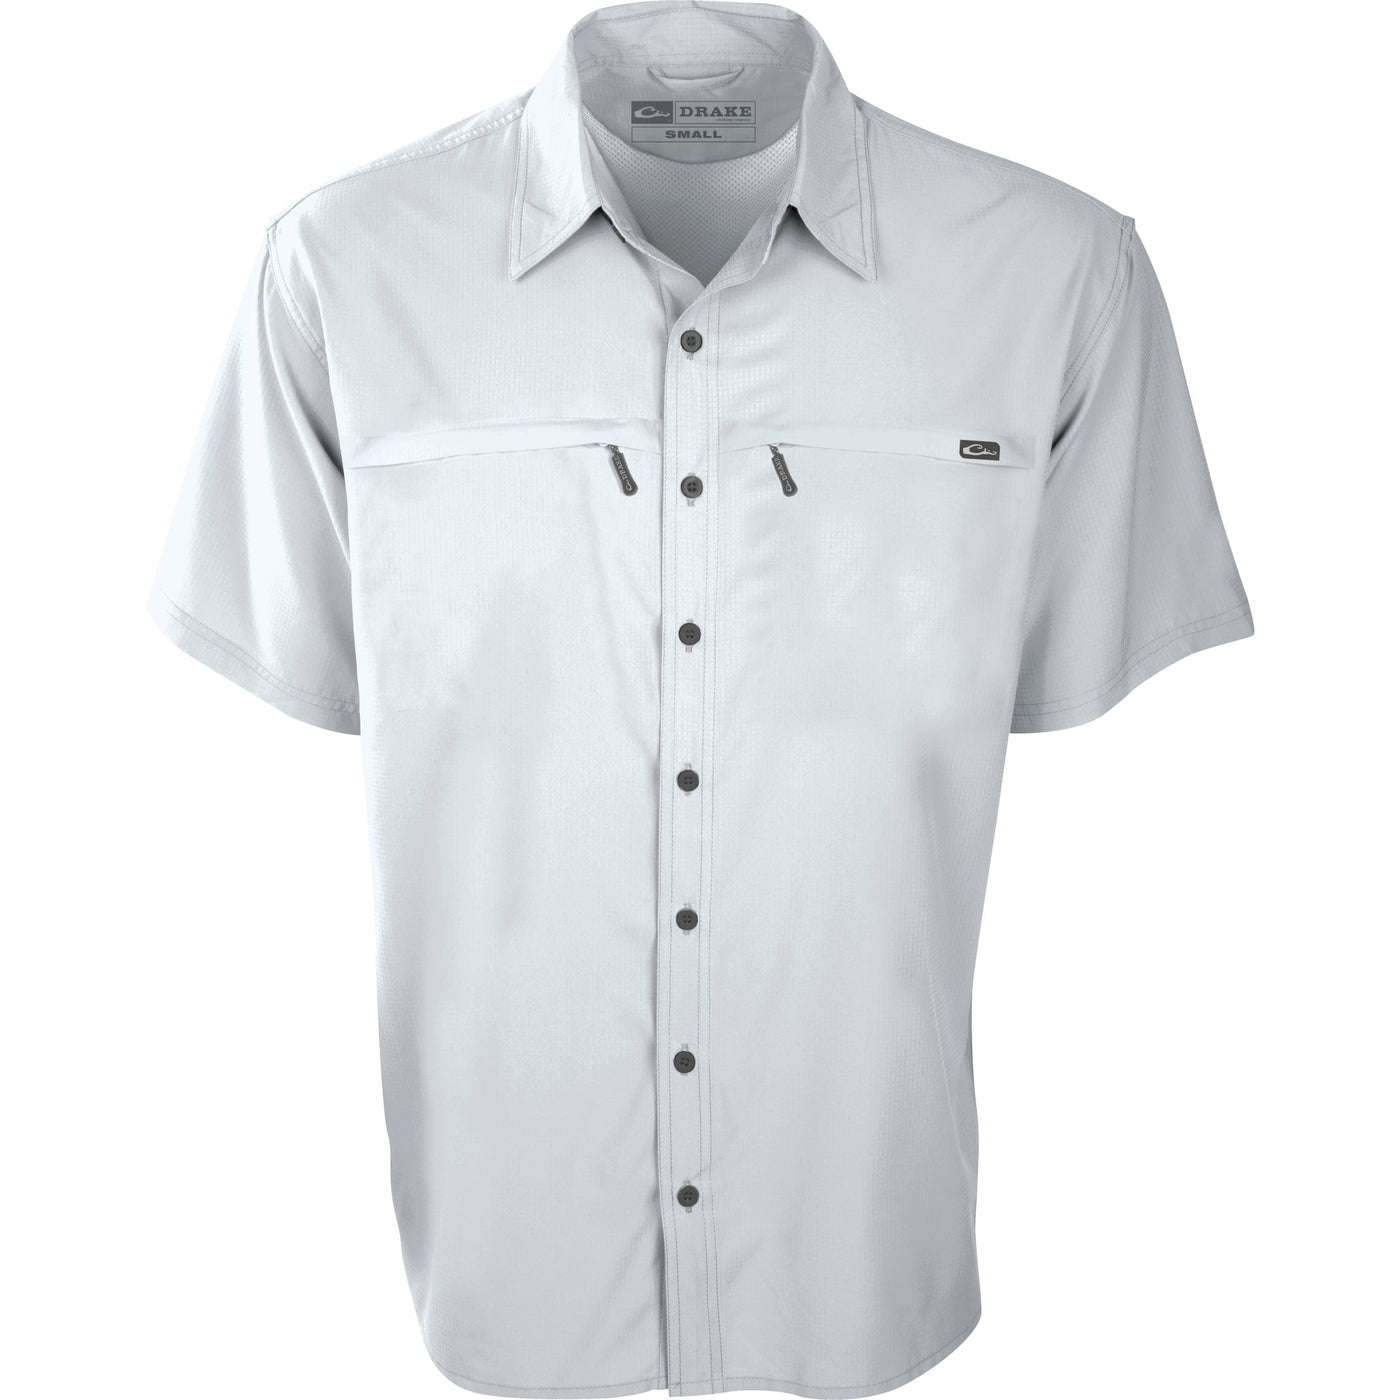 Drake Town Lake Short Sleeve Fishing Shirt-Men's Clothing-Bright White-S-Kevin's Fine Outdoor Gear & Apparel